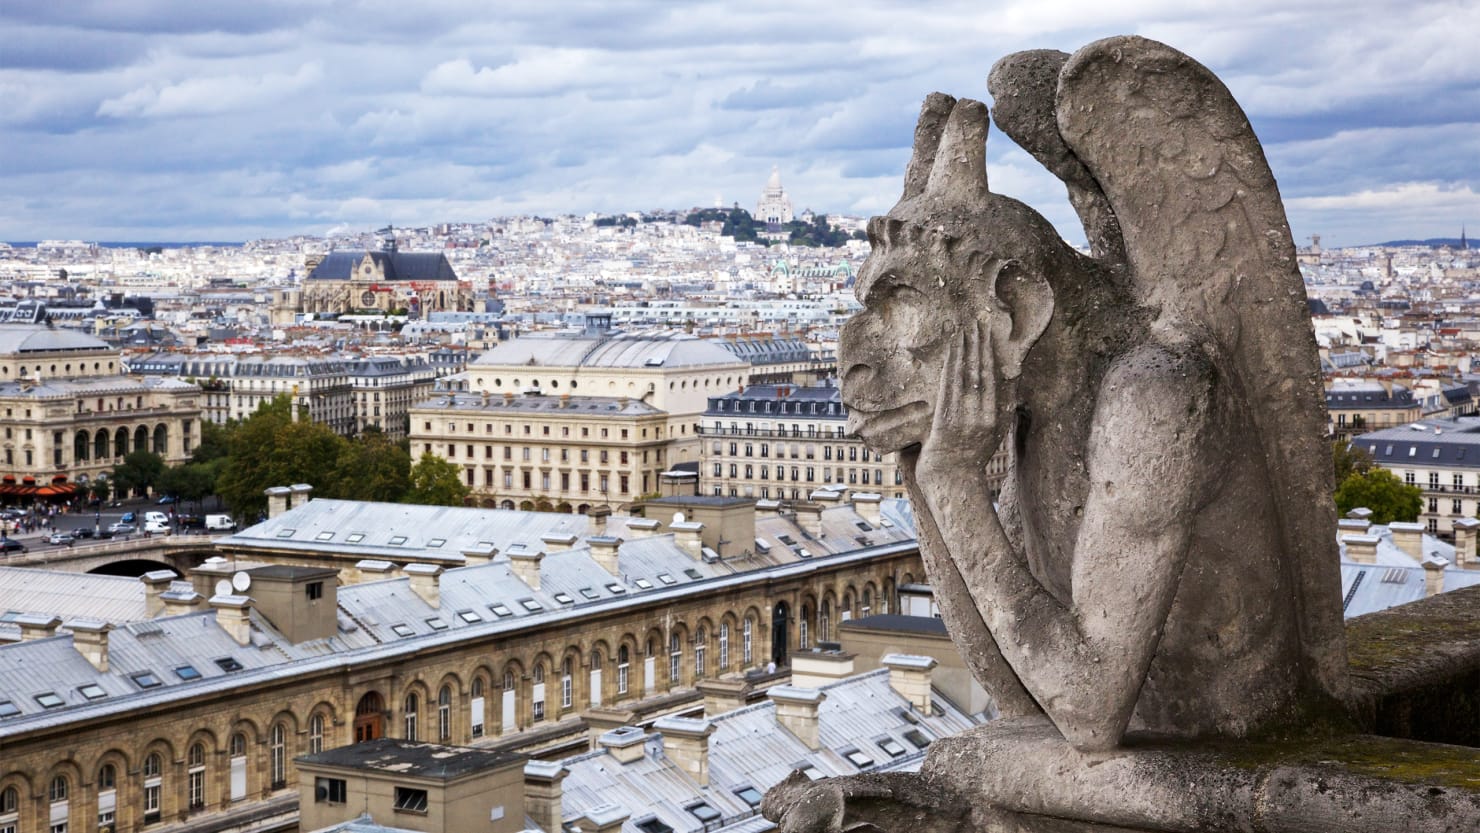 Blurred image of Paris, with the Gargoyle of Notre Dame with their head in their hands in the forefront, in focus.